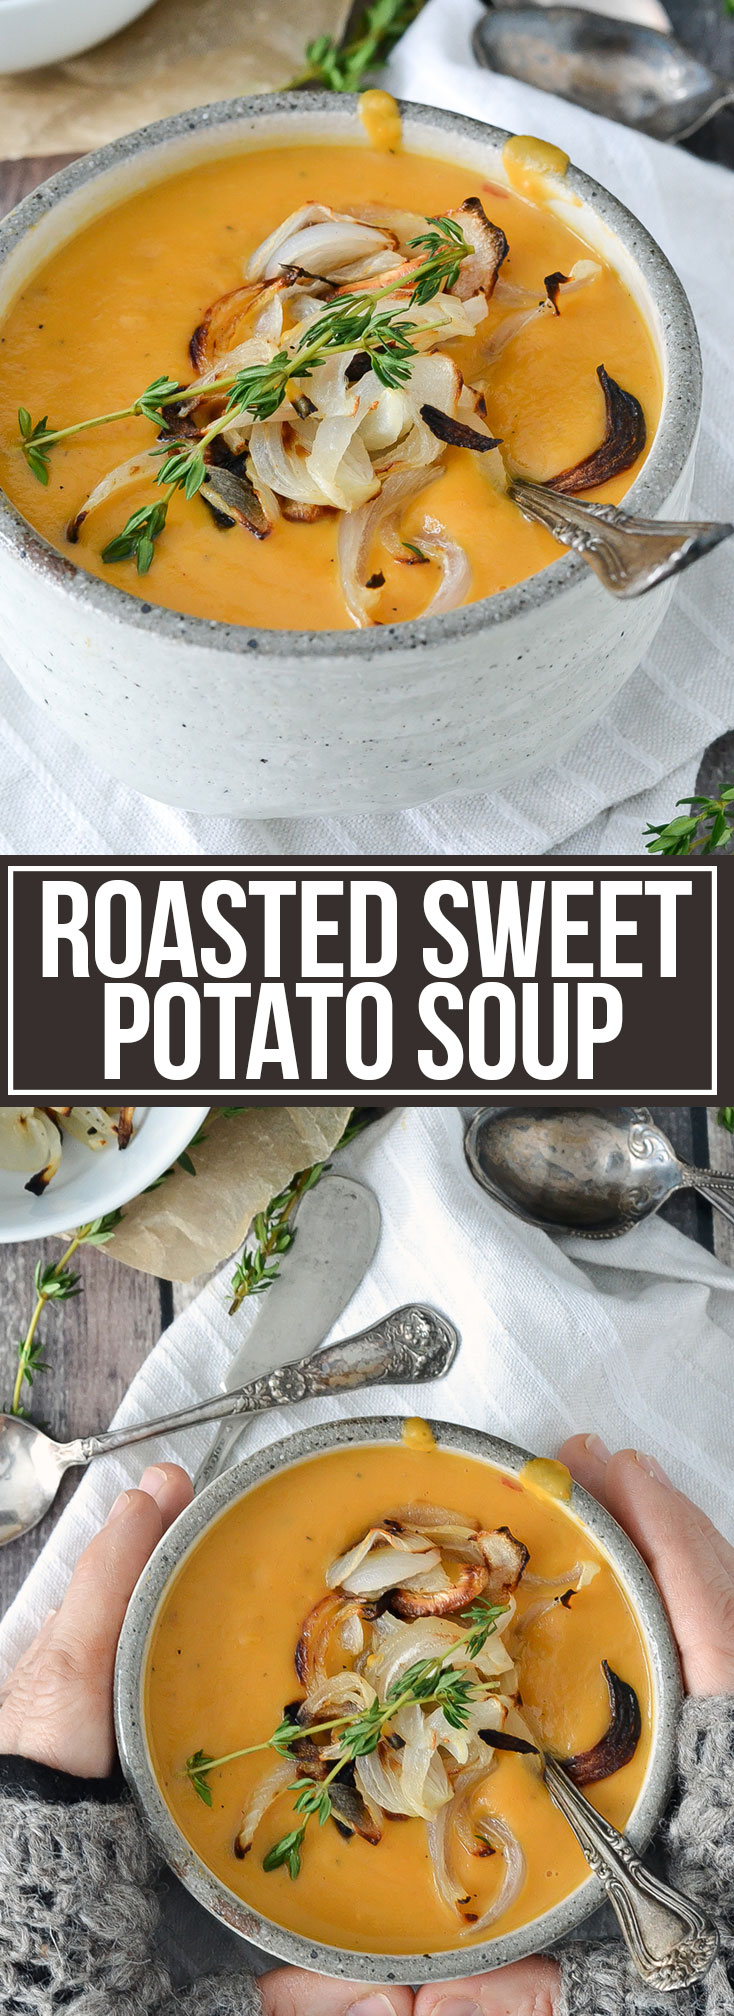 ROASTED SWEET POTATO SOUP WITH CARAMELIZED ONIONS